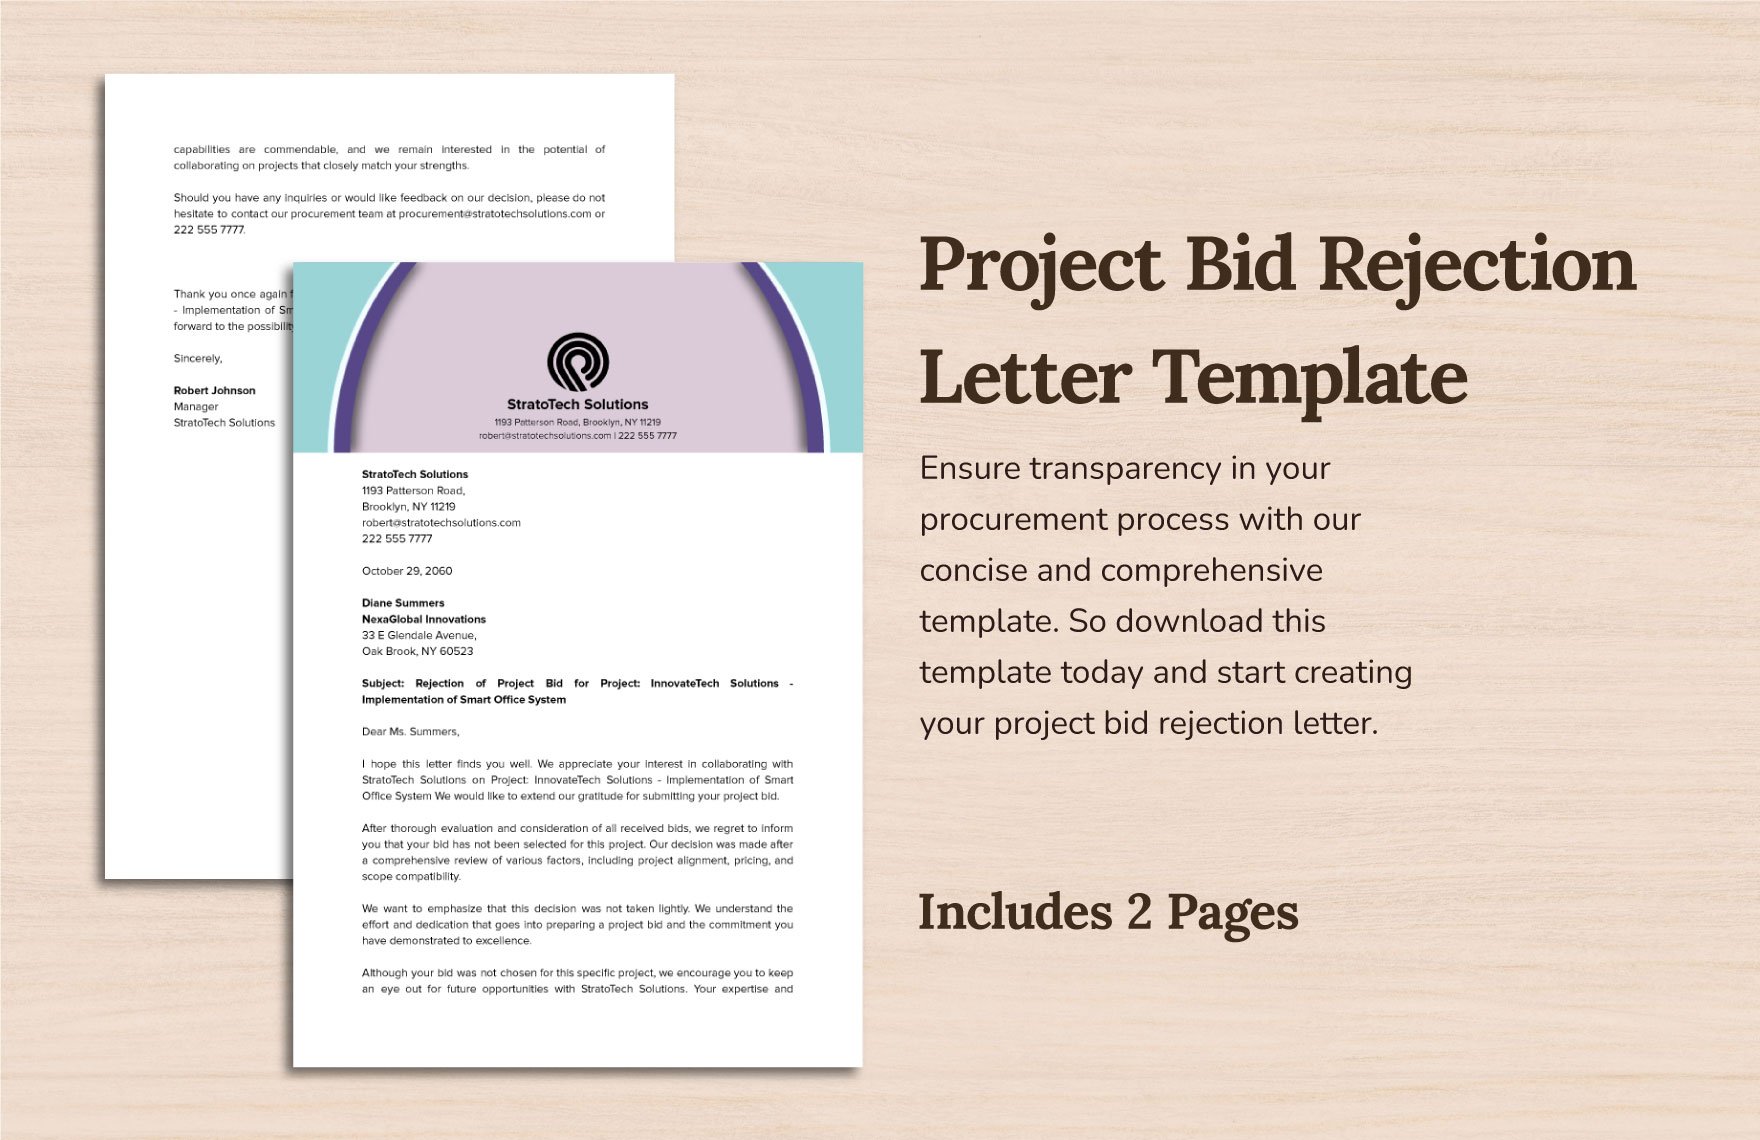 Project Bid Rejection Letter Template